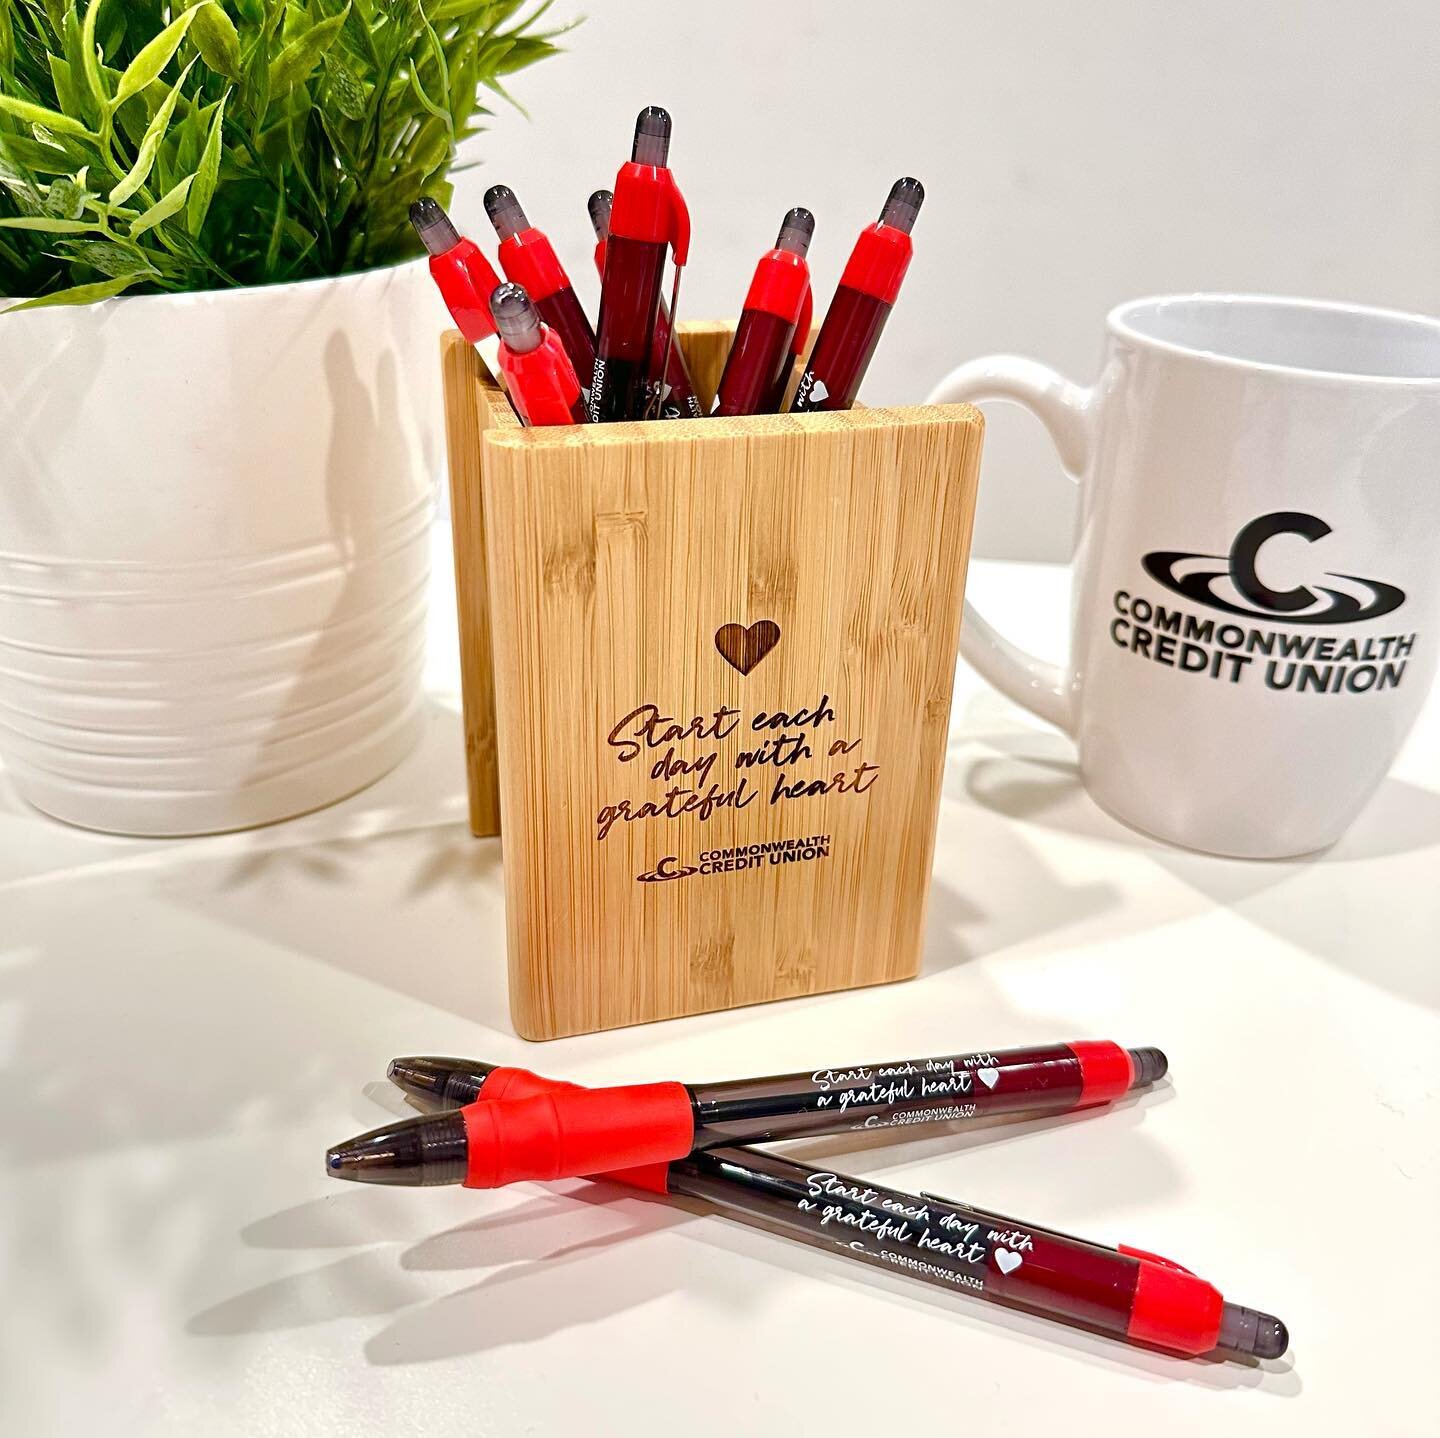 Start each day with a grateful heart ❤️ Check out this laser engraved bamboo holder with matching pens! 
&bull;
&bull;
&bull;
&bull;
&bull;
#customdesign #penholder #pencilholder 
#commonwealthcreditunion #americanheartassociation #awareness #sixhors